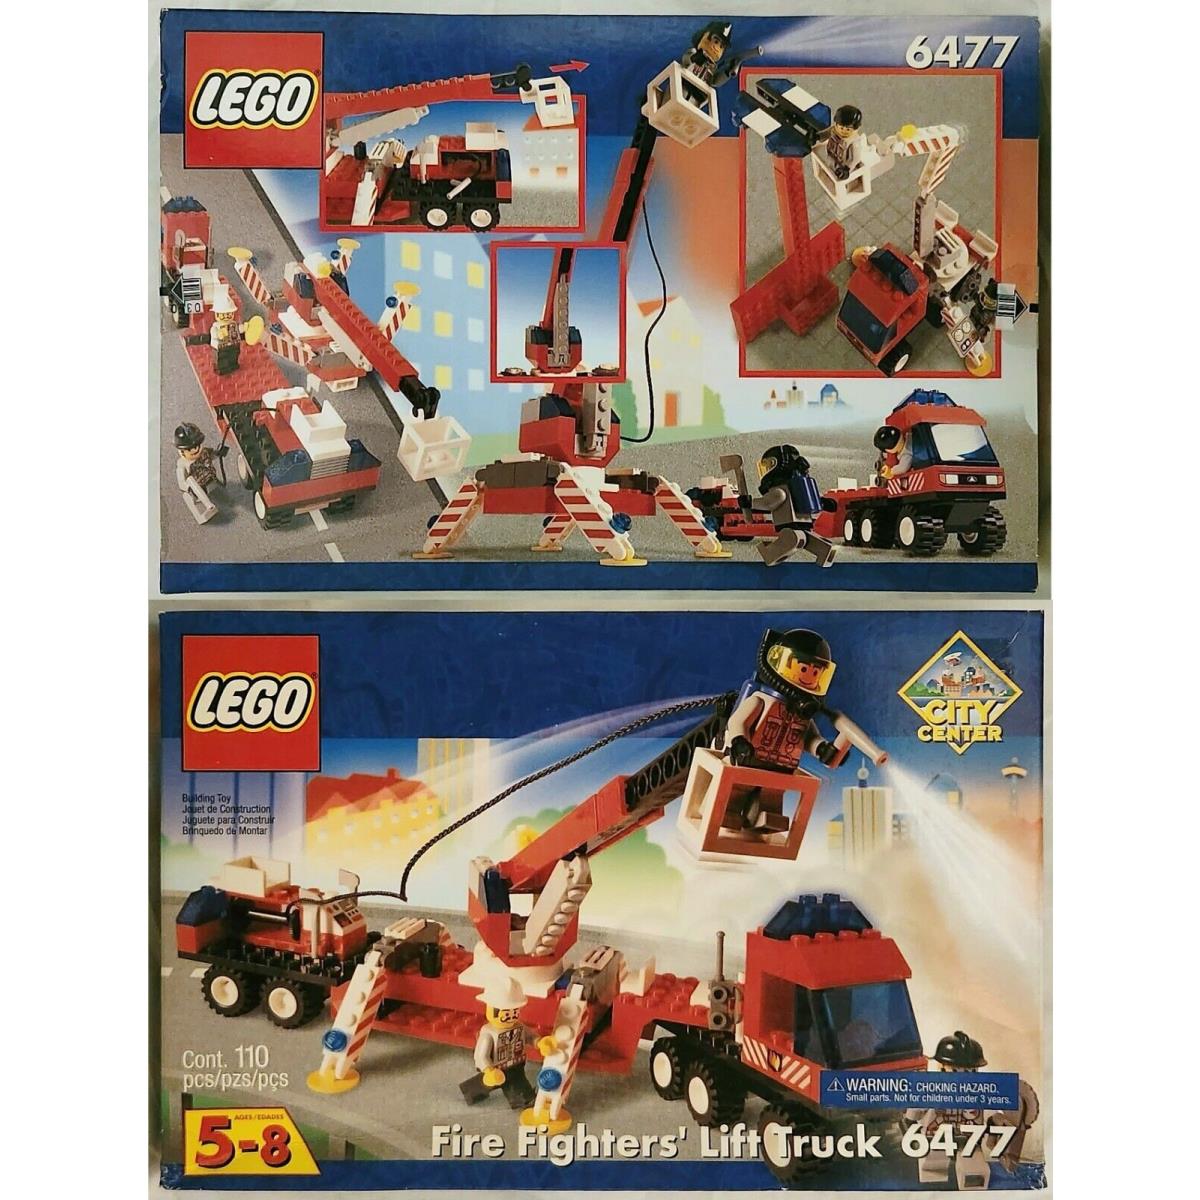 Lego 6477 Fire Fighters` Lift Truck - IN Factory Box